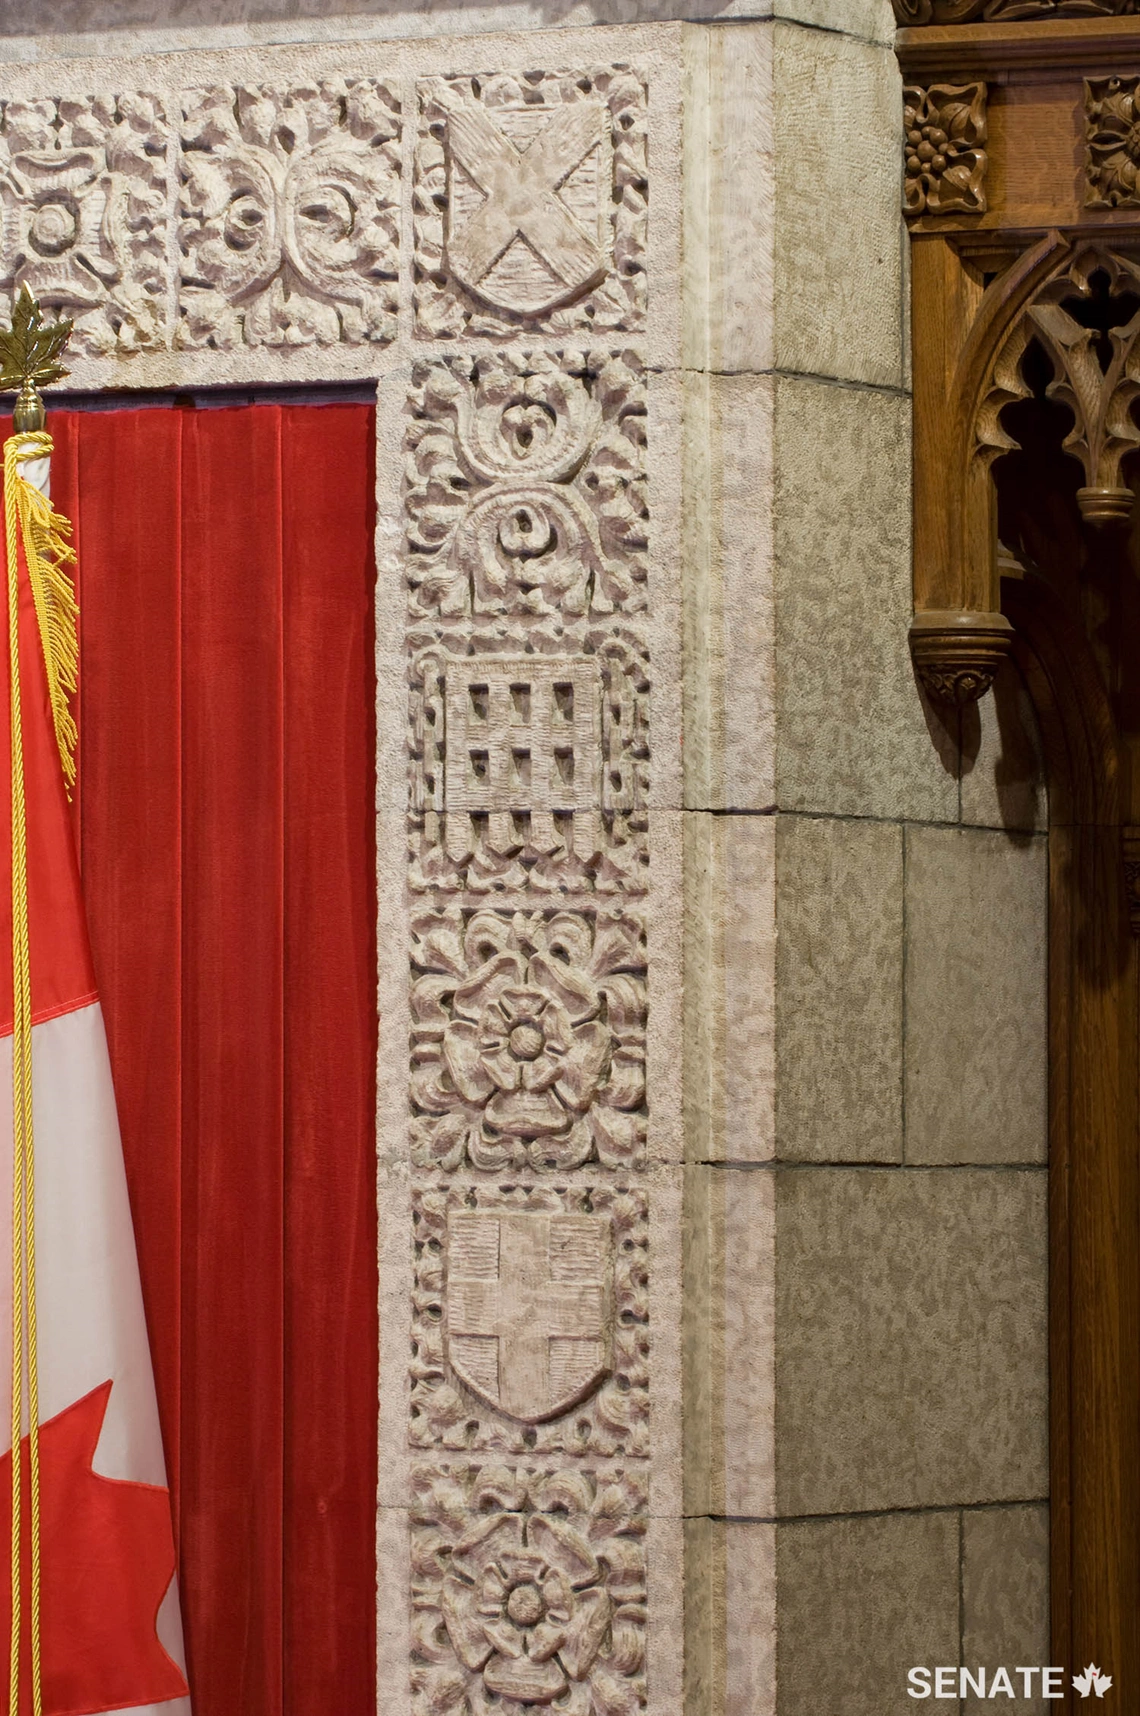 The backdrop to the Senate Speaker’s dais is a gallery of British heraldic symbols, including Saint Andrew’s cross, the portcullis emblem of Henry VII, the Tudor rose and Saint George’s cross.